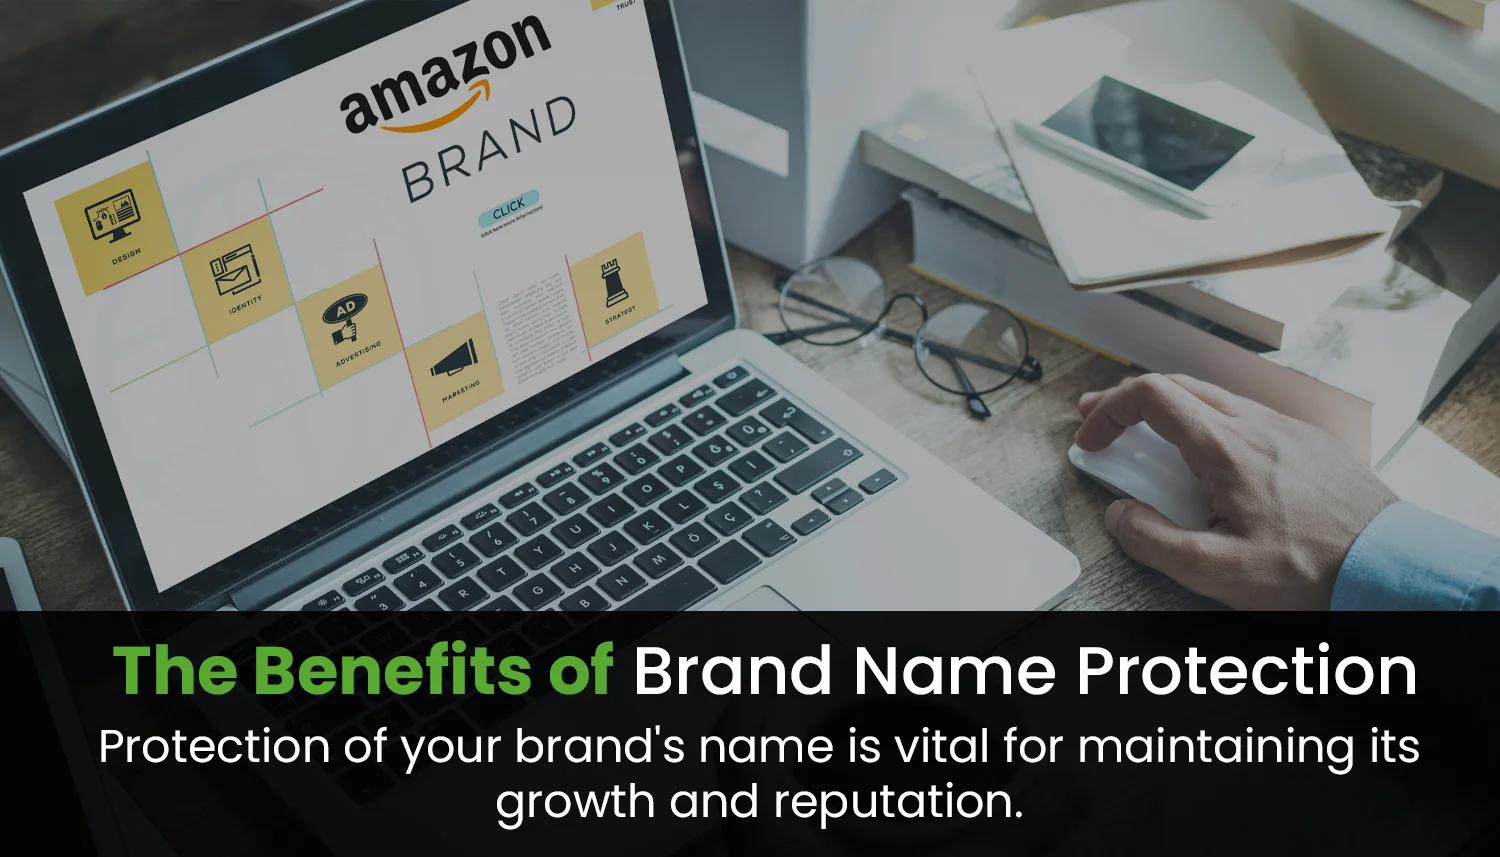 The Benefits of Brand Name Protection